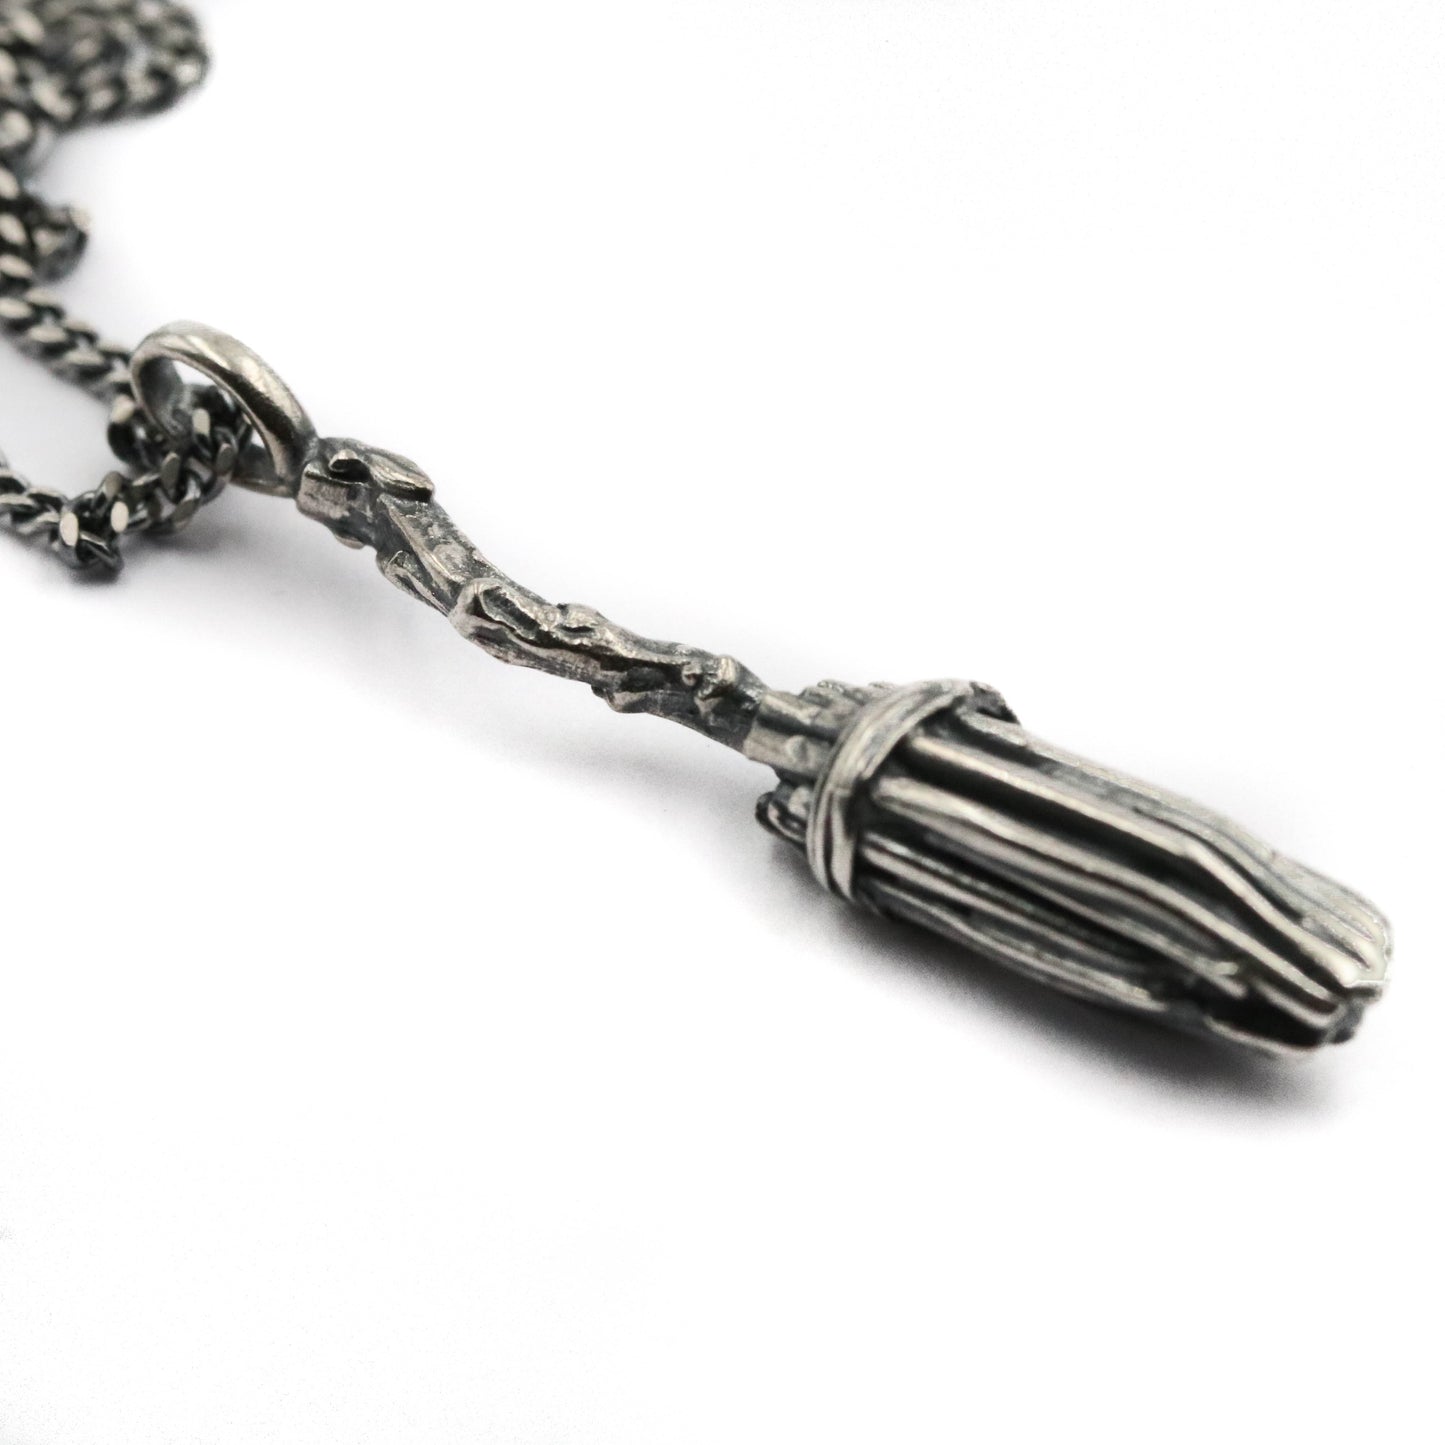 Witches Besom Necklace - Broomstick Pendant